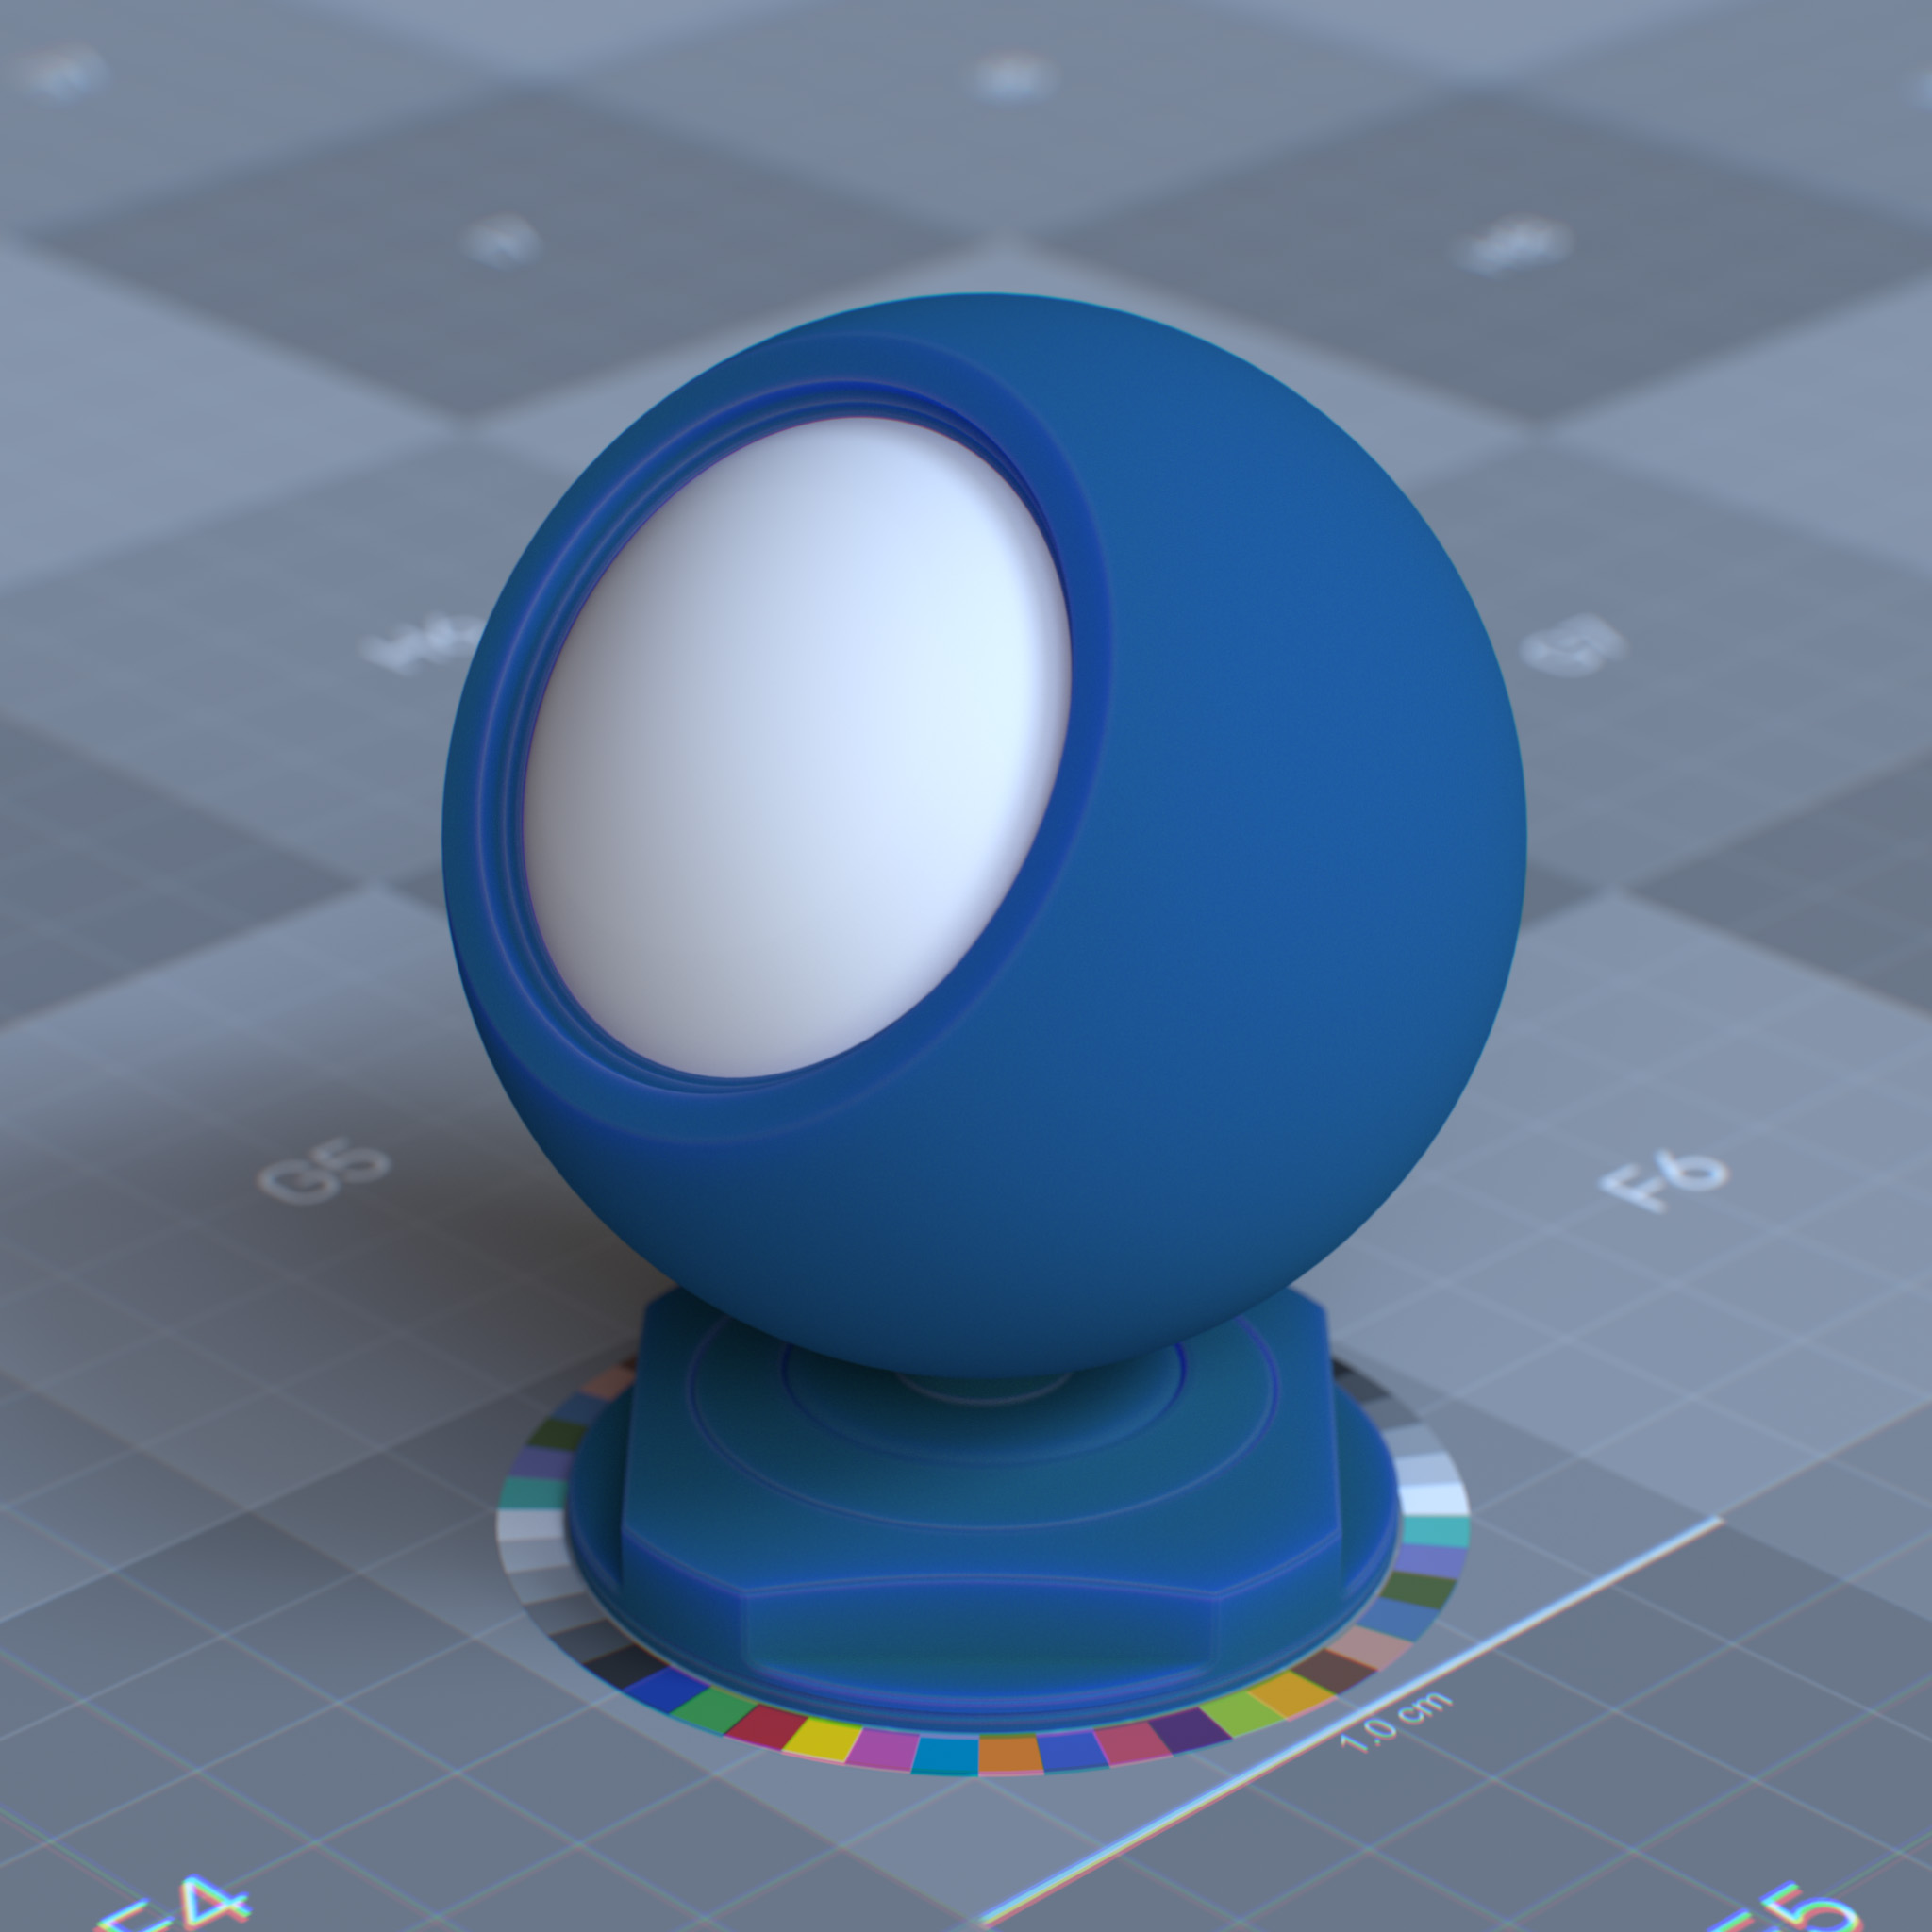 rtx_material_omnisurfacebase_specular_reflection_weight_0p0